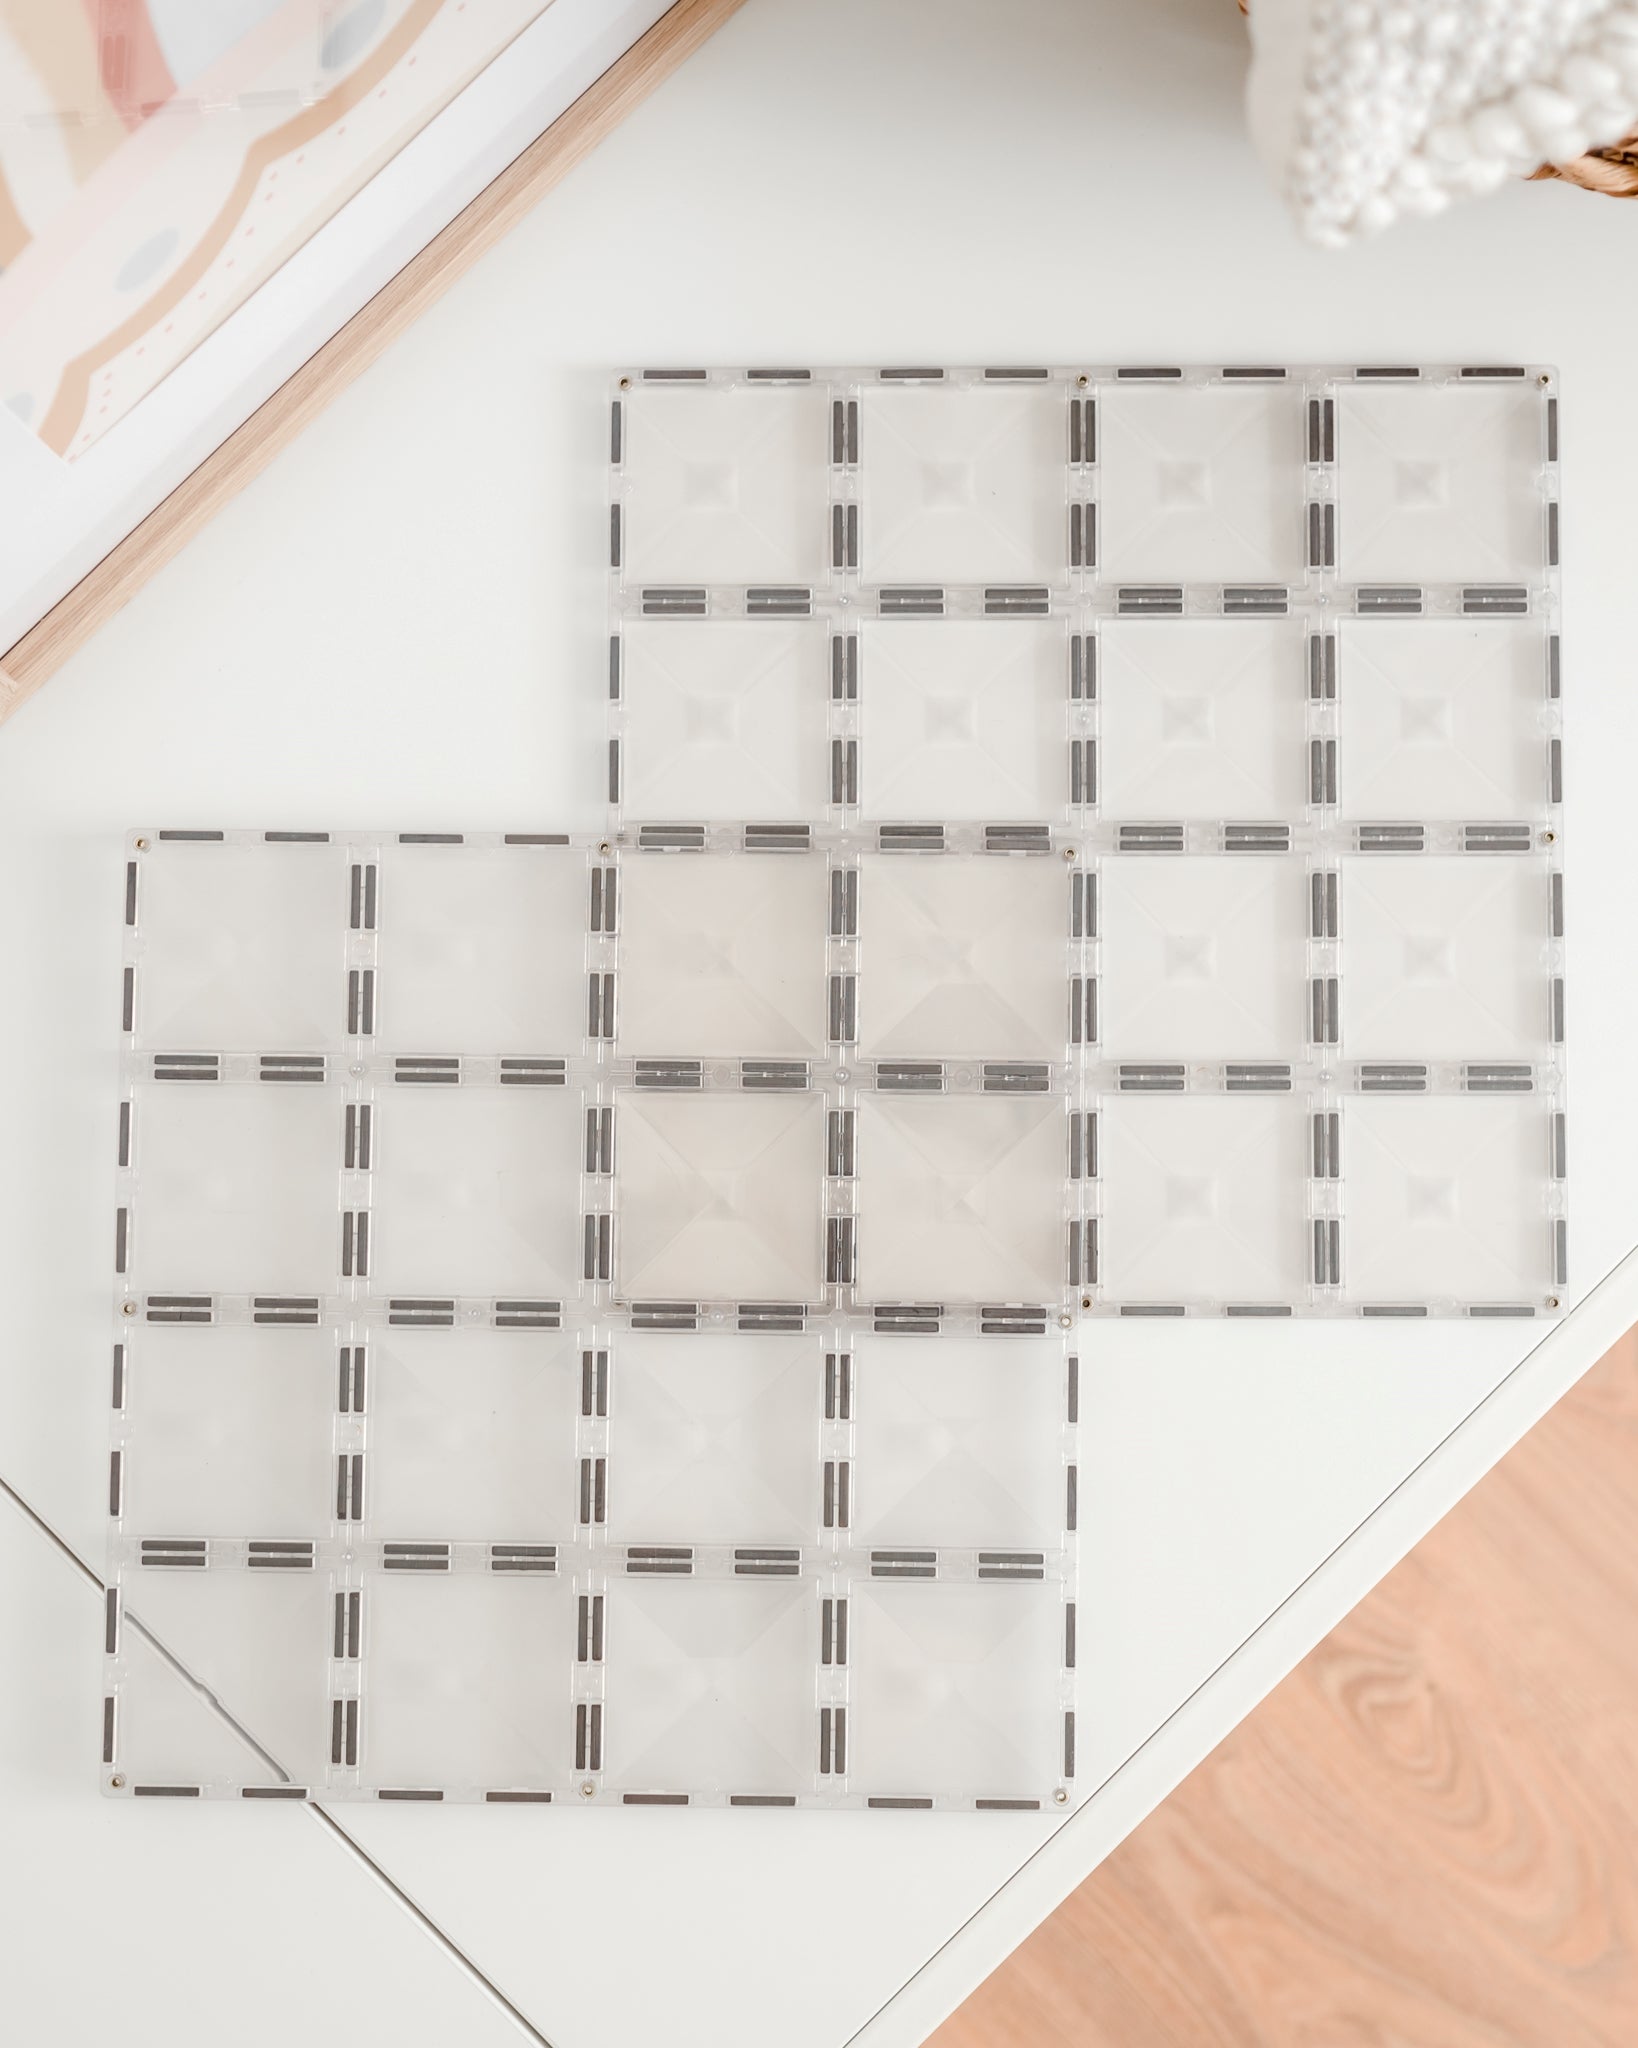 Magnetic tiles 2pcs Clear Base Plate Pack by Connetix – Woodberry